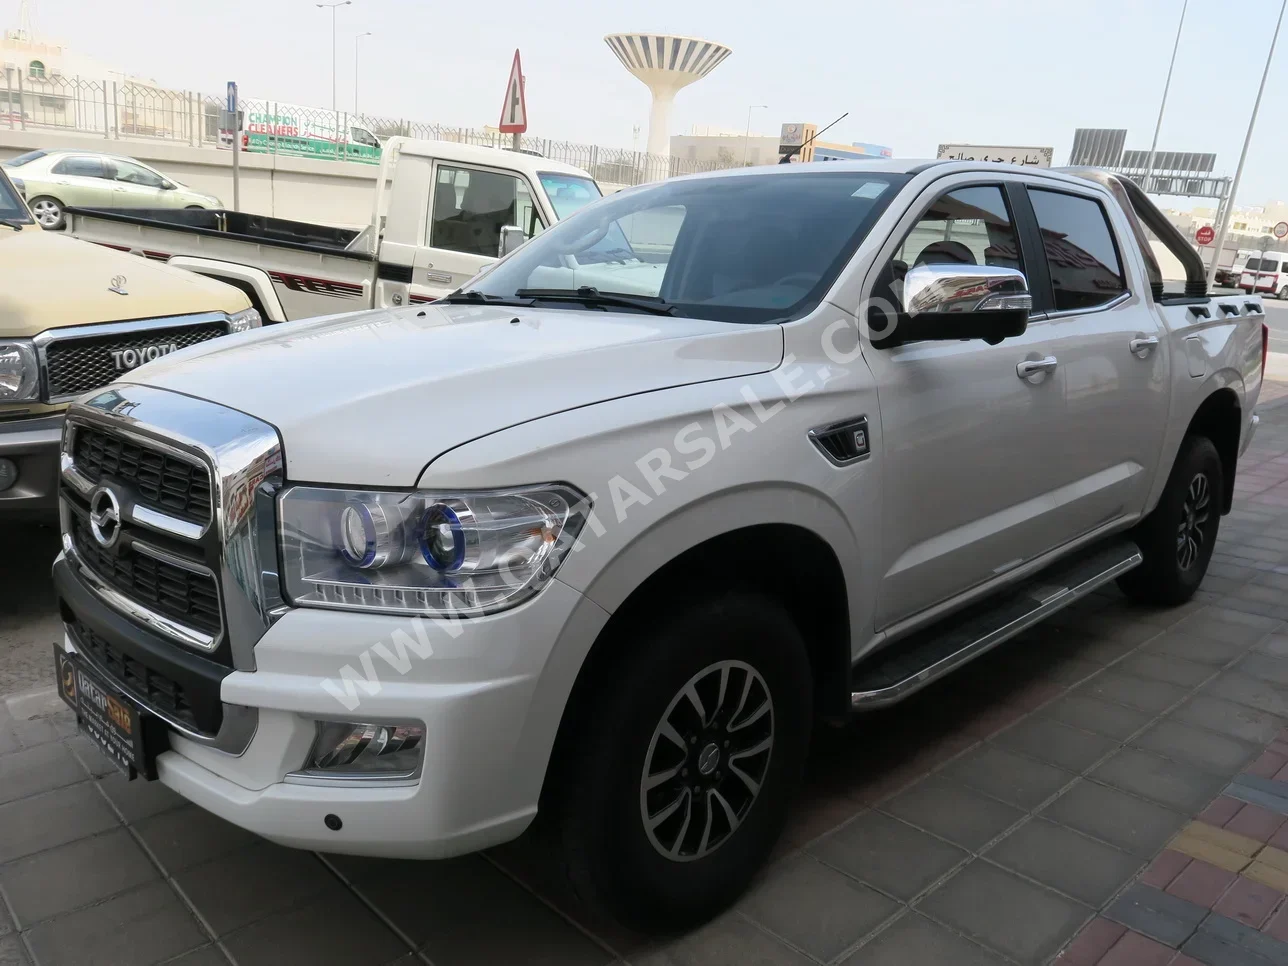 Zxauto  Terralord  2022  Manual  28,000 Km  4 Cylinder  Four Wheel Drive (4WD)  Pick Up  White